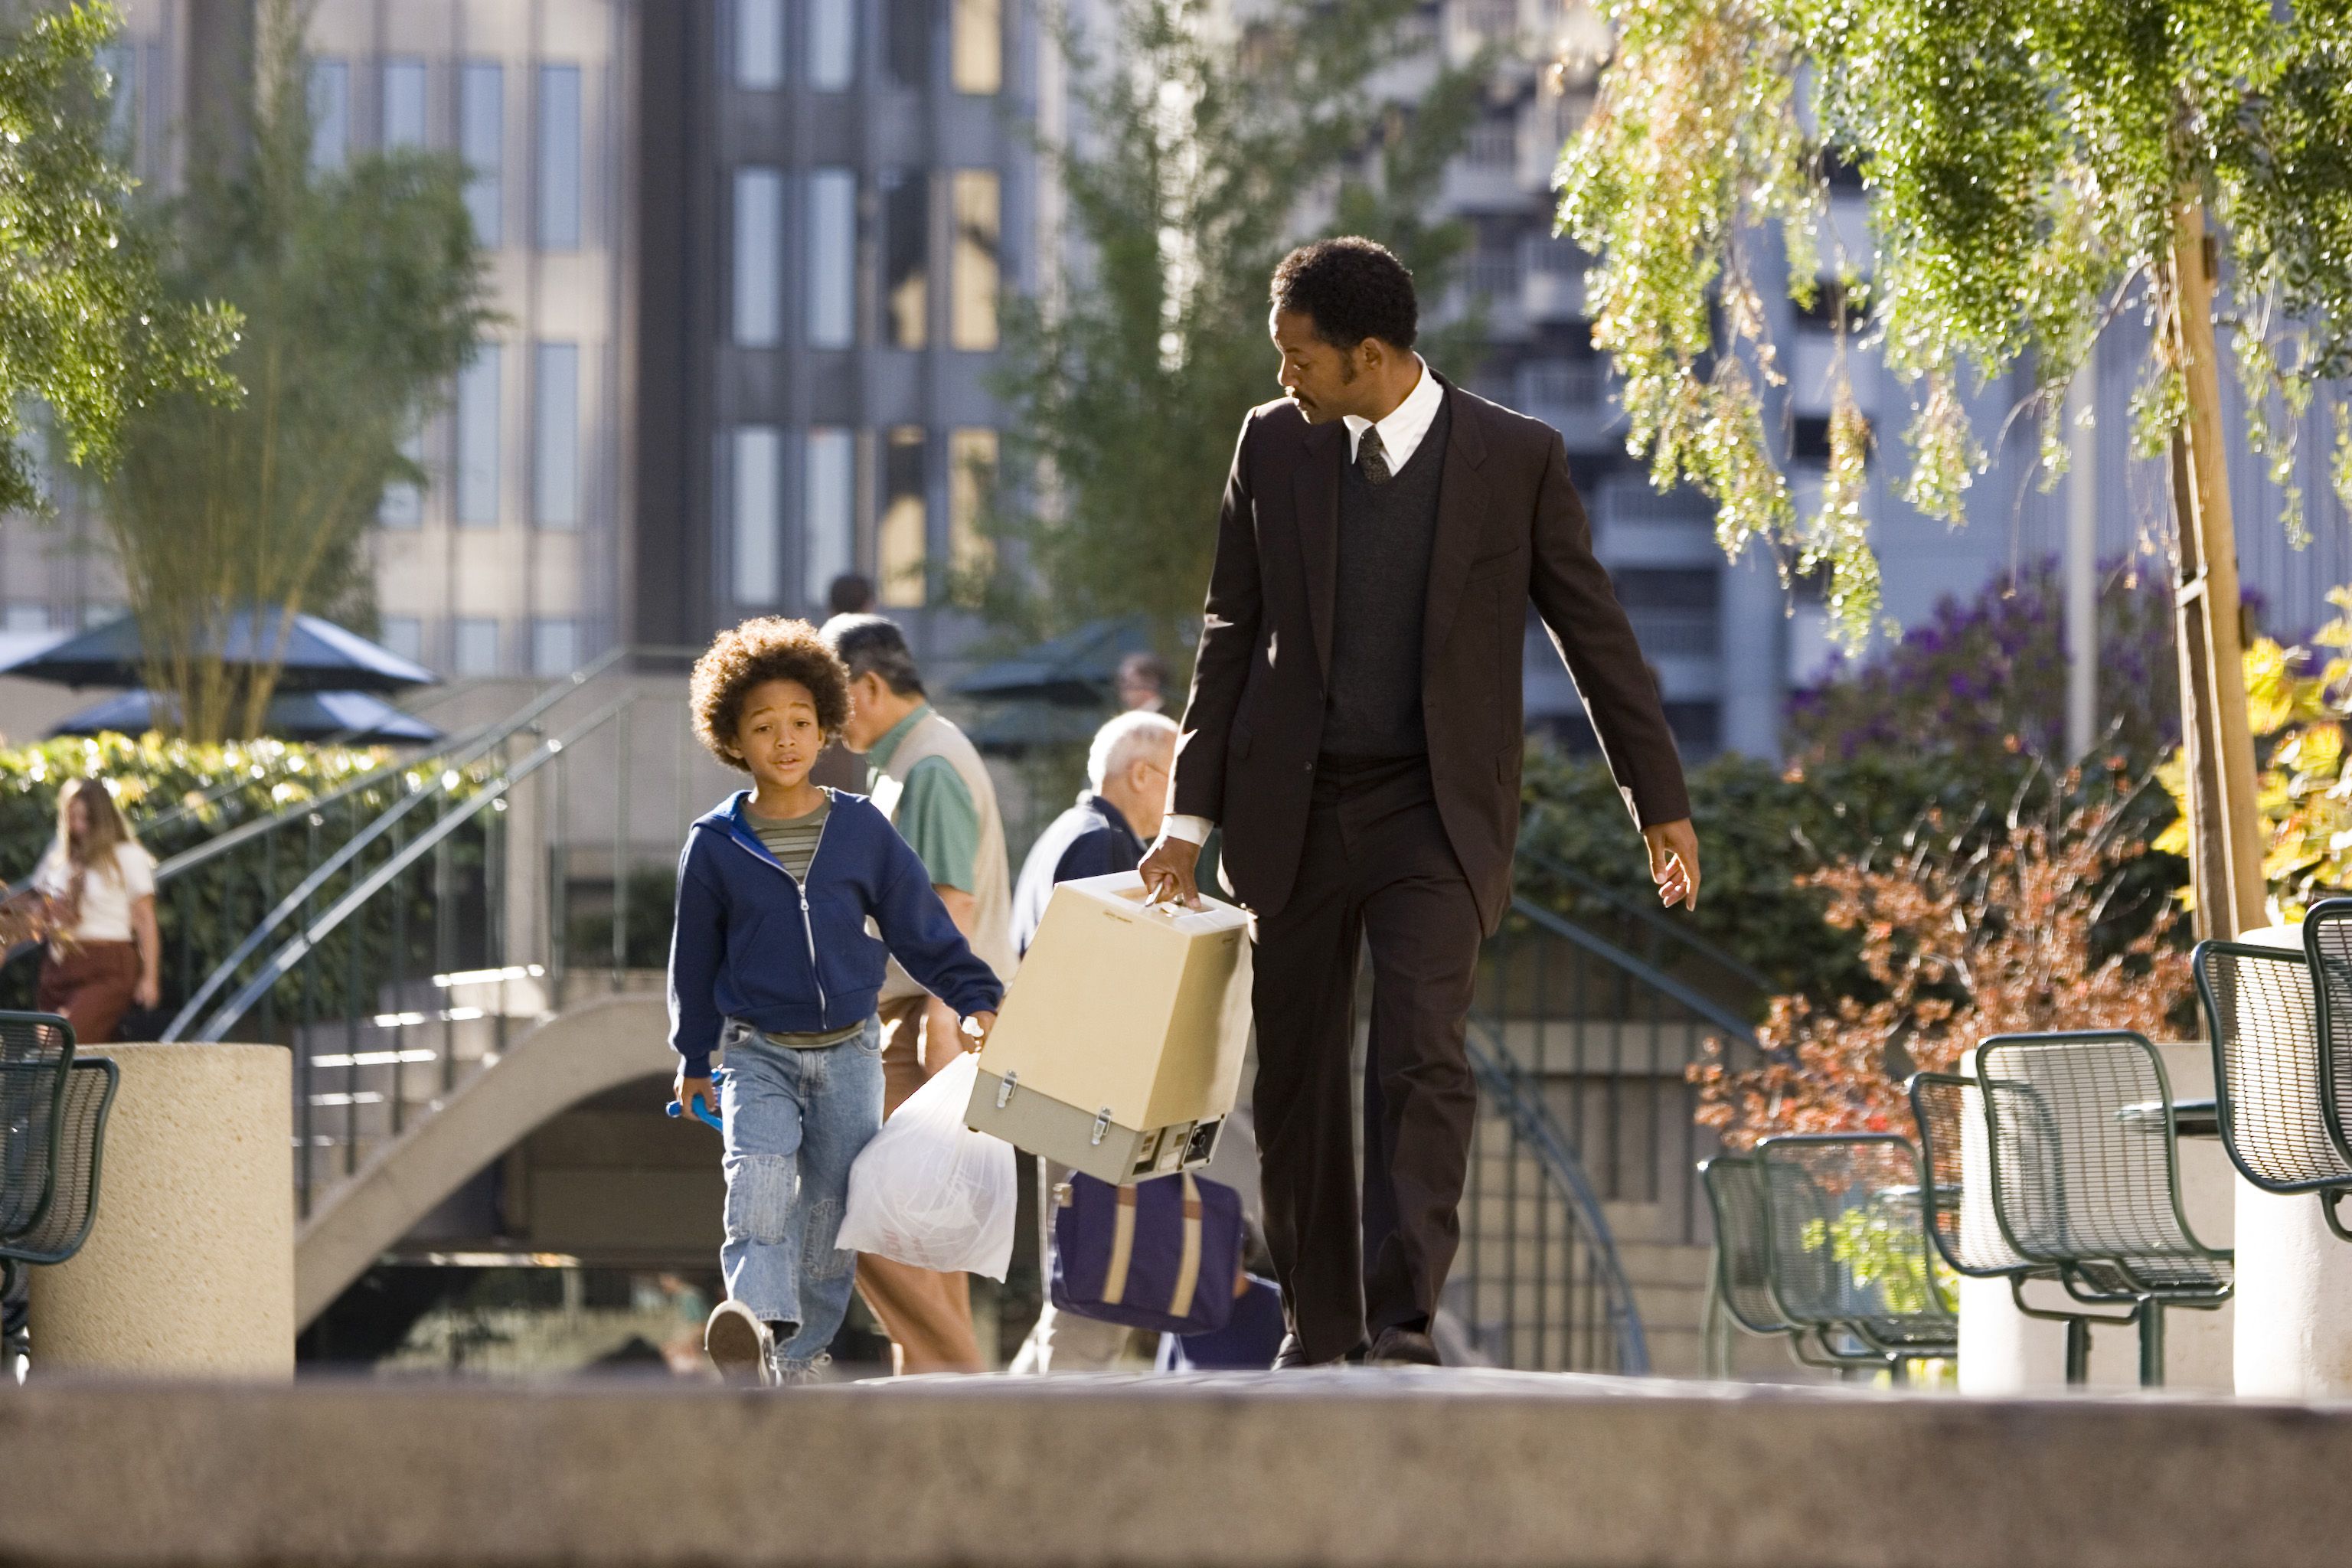 In The Pursuit of Happyness (2006), Will Smith walked past the real Chris  Gardner, the man he played and the movie was based on. : r/MovieDetails